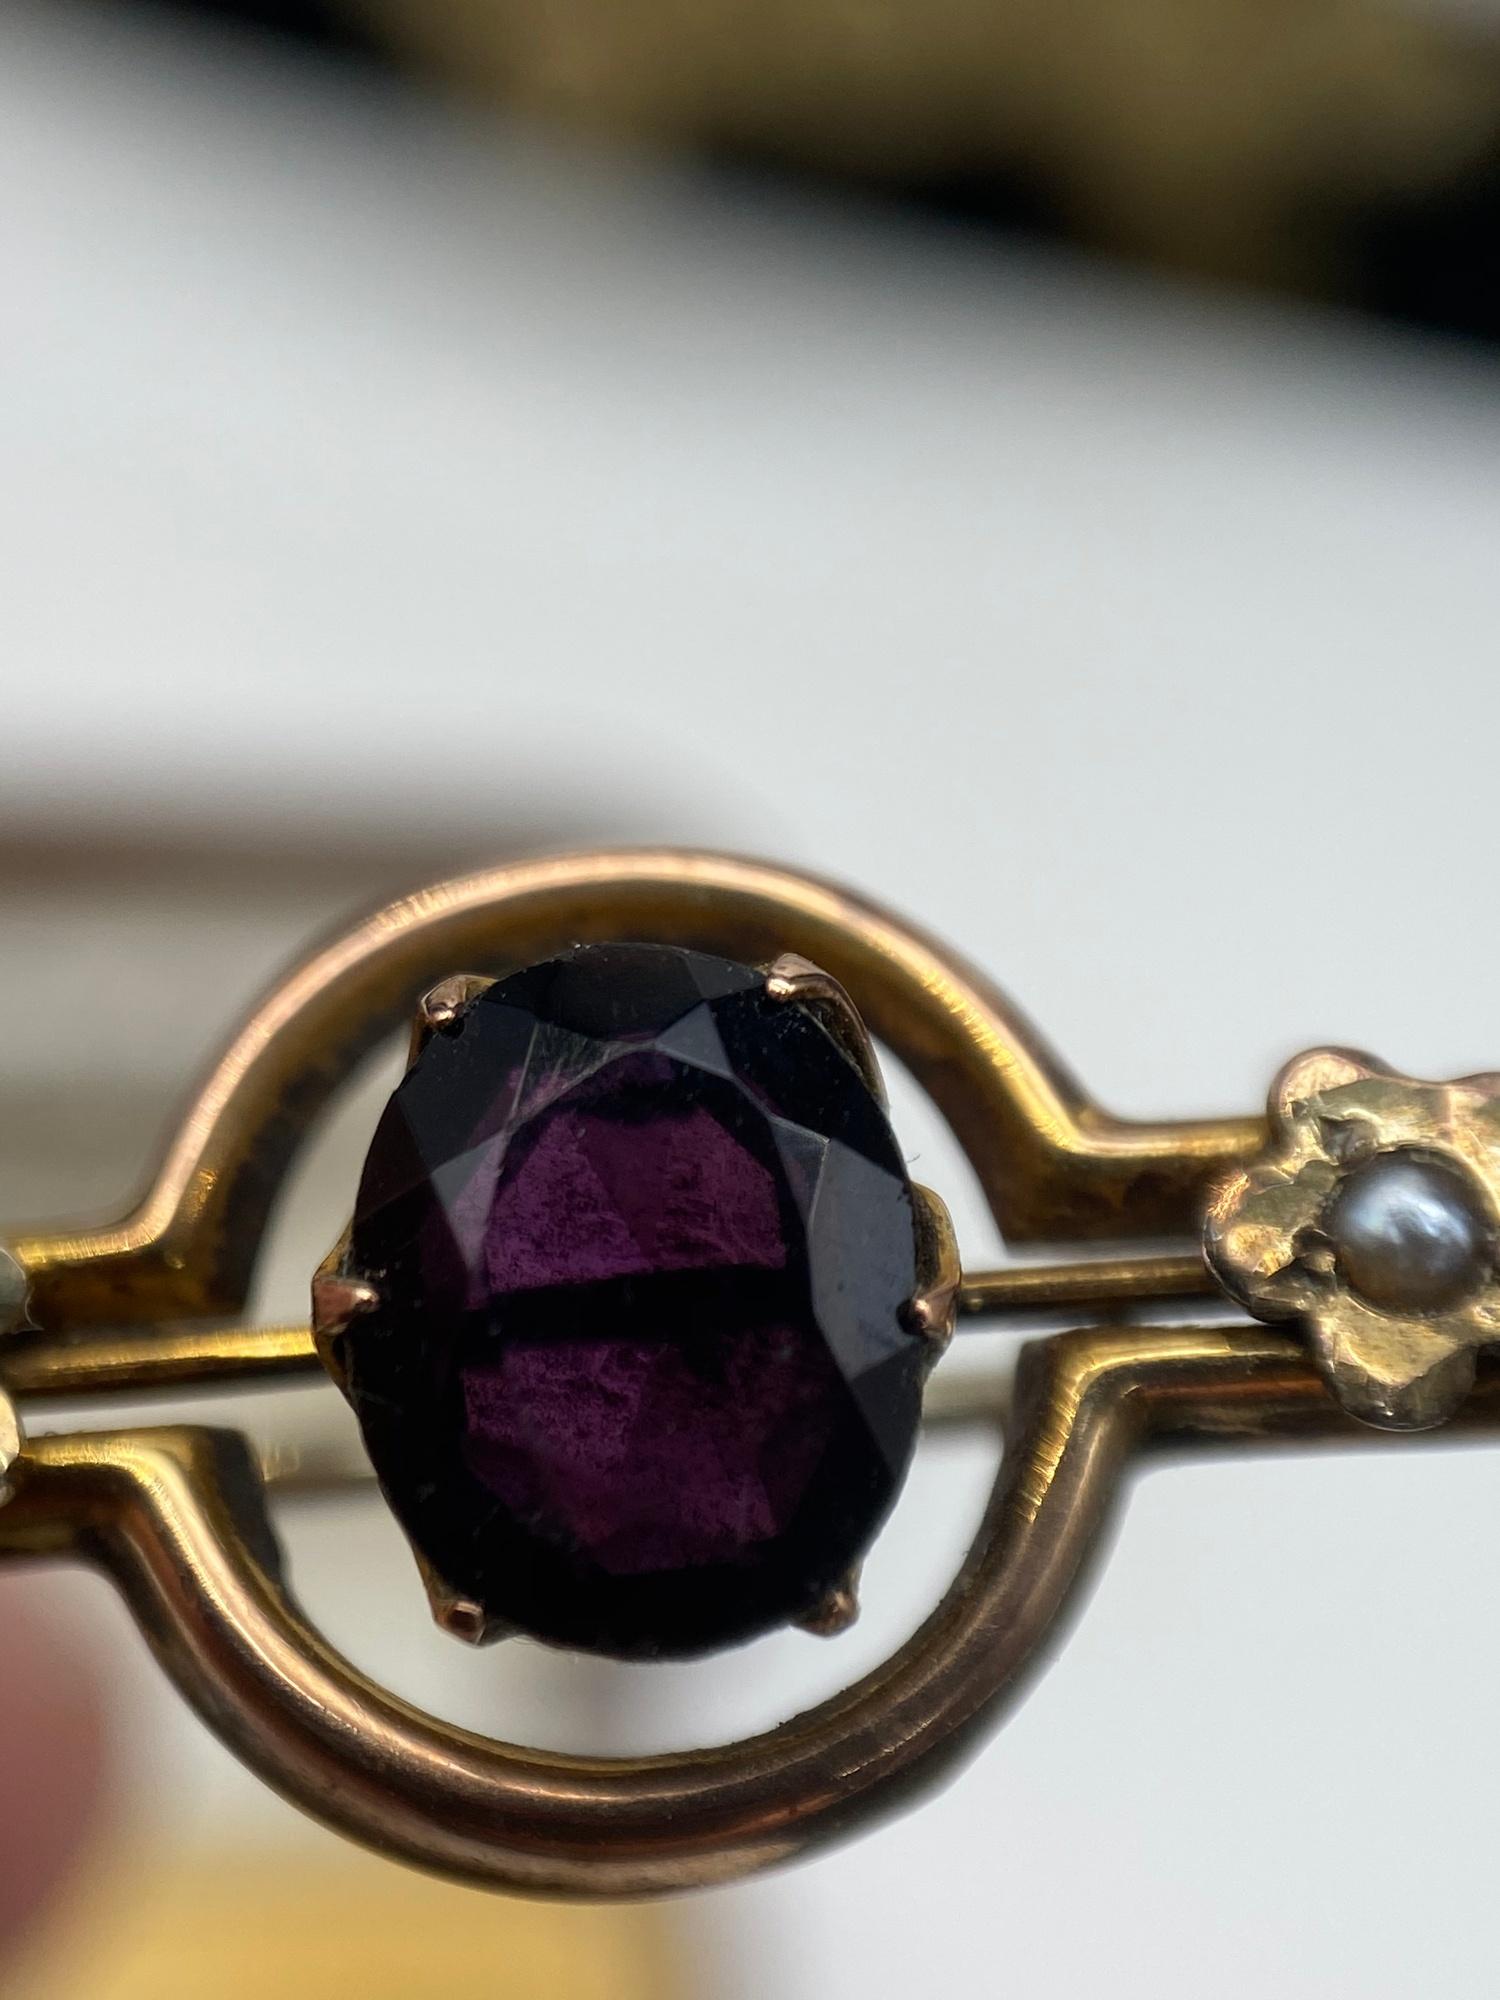 A Ladies antique 9ct gold bar brooch set with three seed pearls [one missing] and a large Amethyst - Image 5 of 5